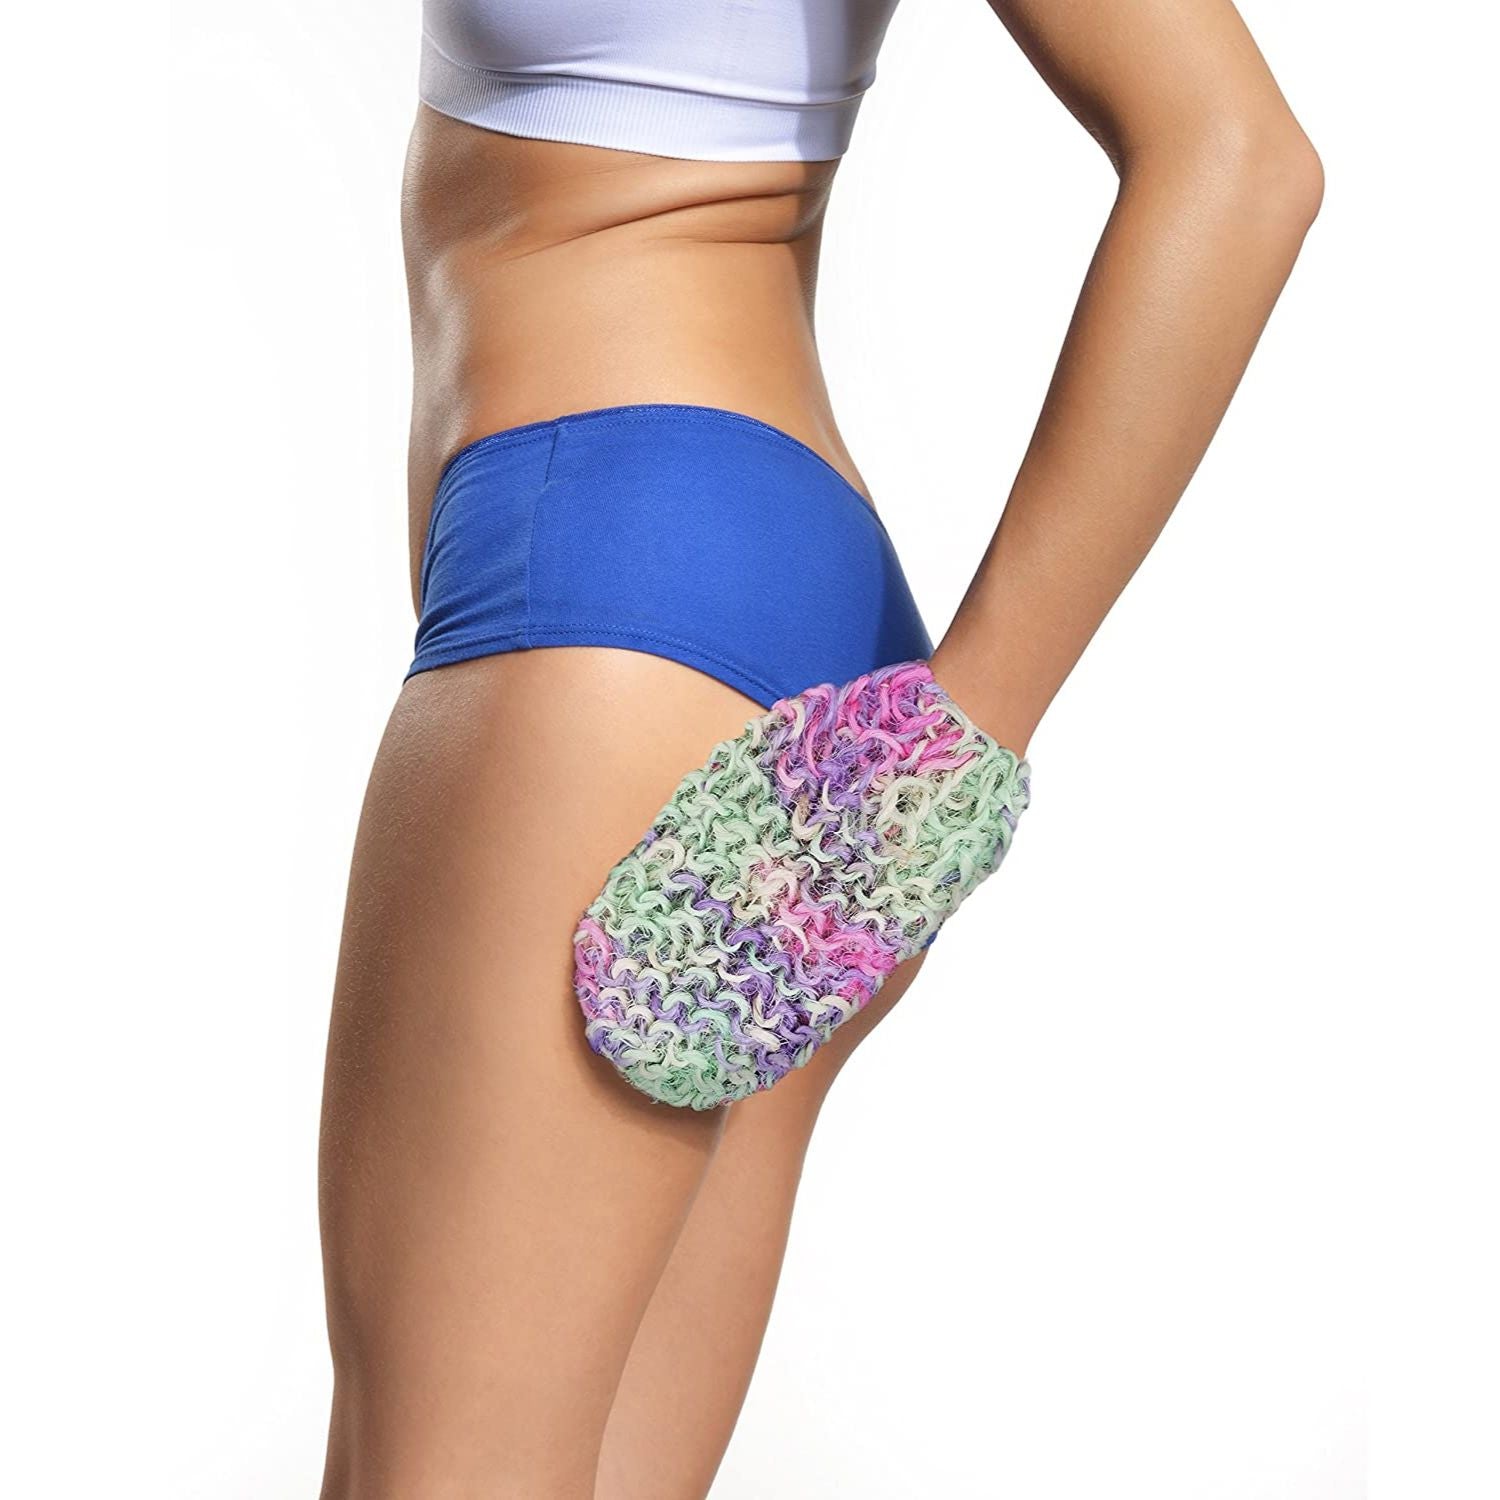 Dry Body Brush Mitts for Cellulite (Set of 2)  - Special Price